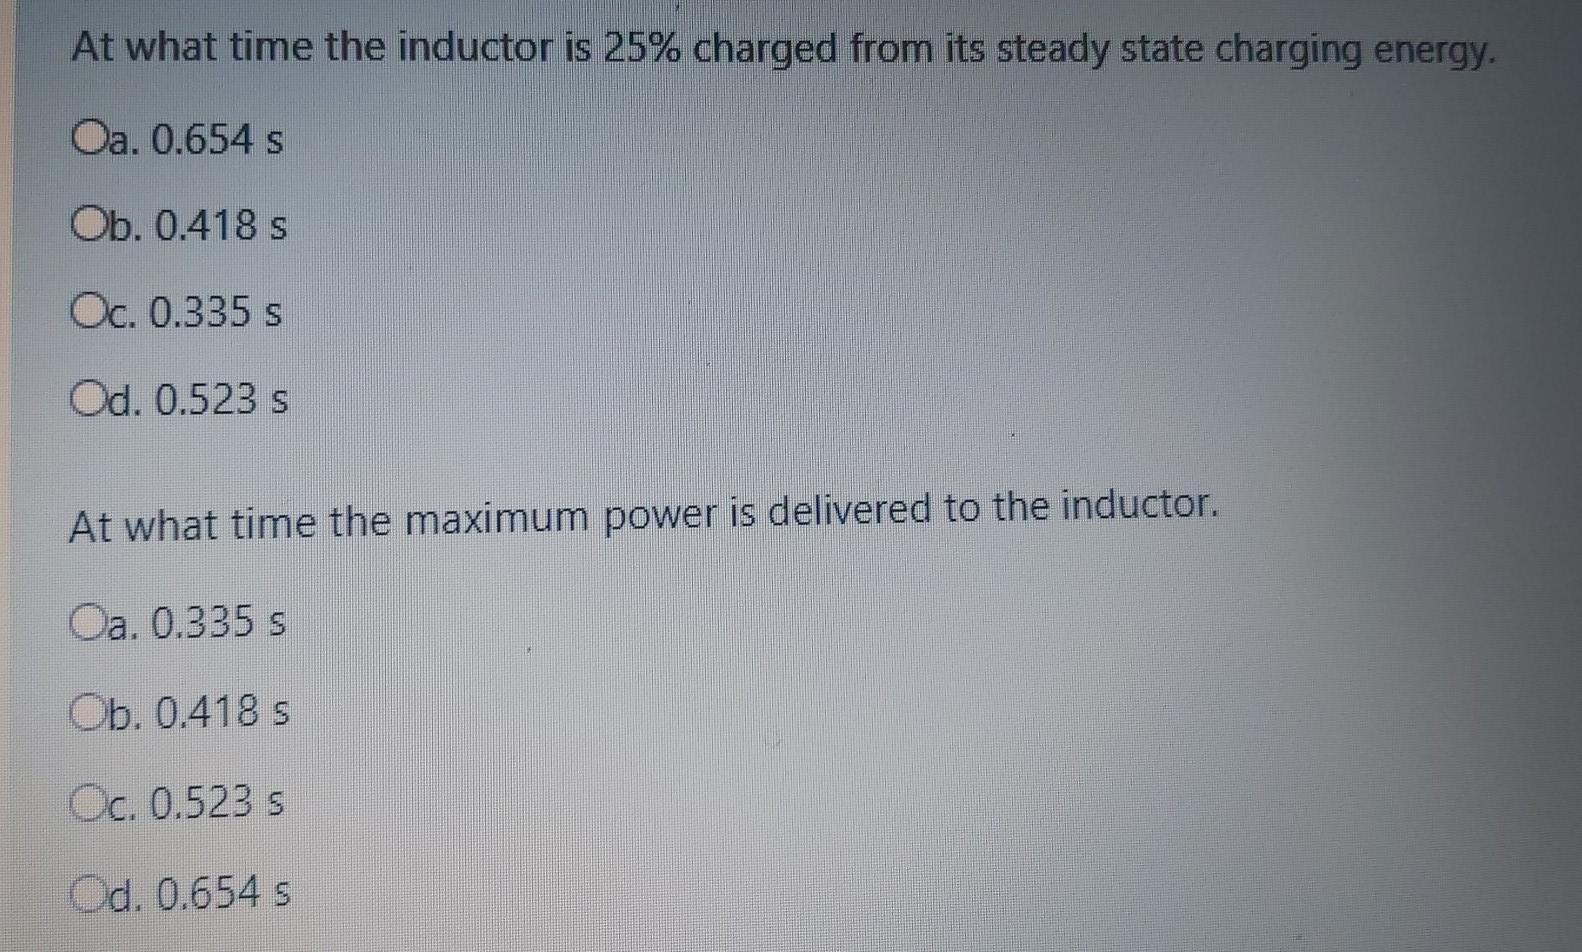 At what time the inductor is 25% charged from its steady state charging energy. Oa. 0.654 s Ob. 0.418 s Oc. 0.335 s Od. 0.523